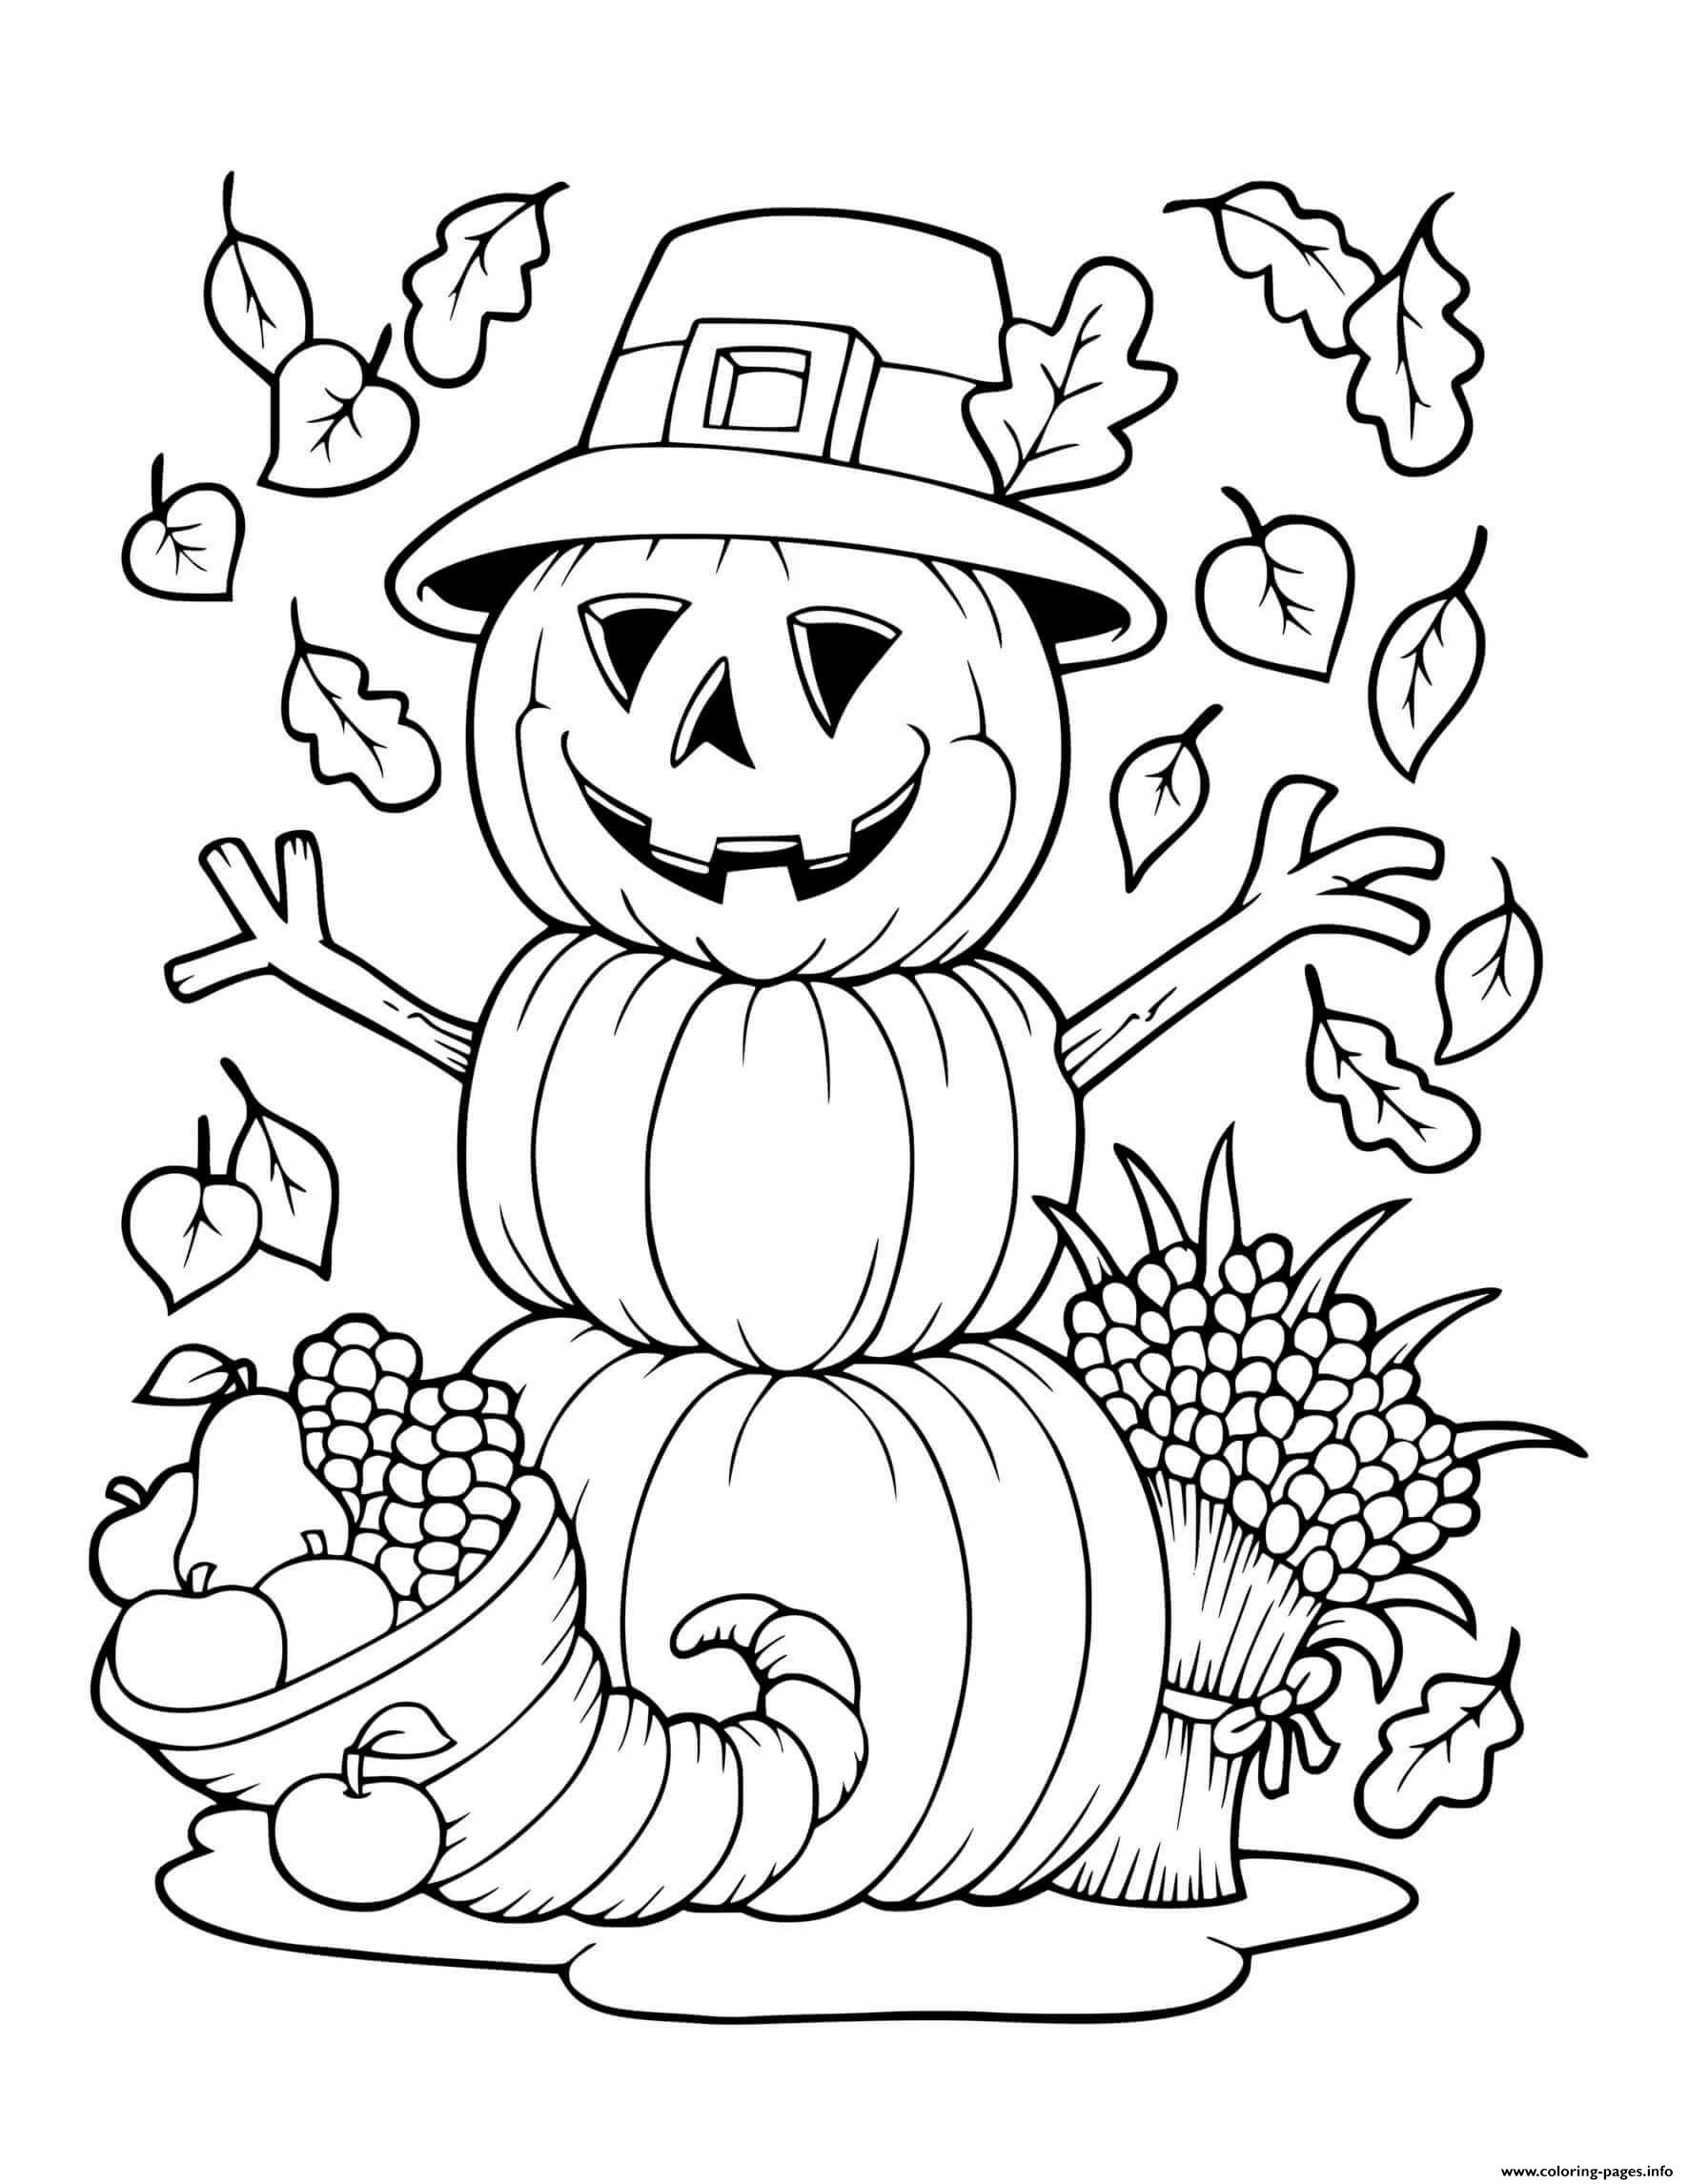 Thanksgiving Scarecrow Pumpkin Cornucopia Harvest Coloring Pages Printable - Thanksgiving 2014 Coloring Pictures Printables